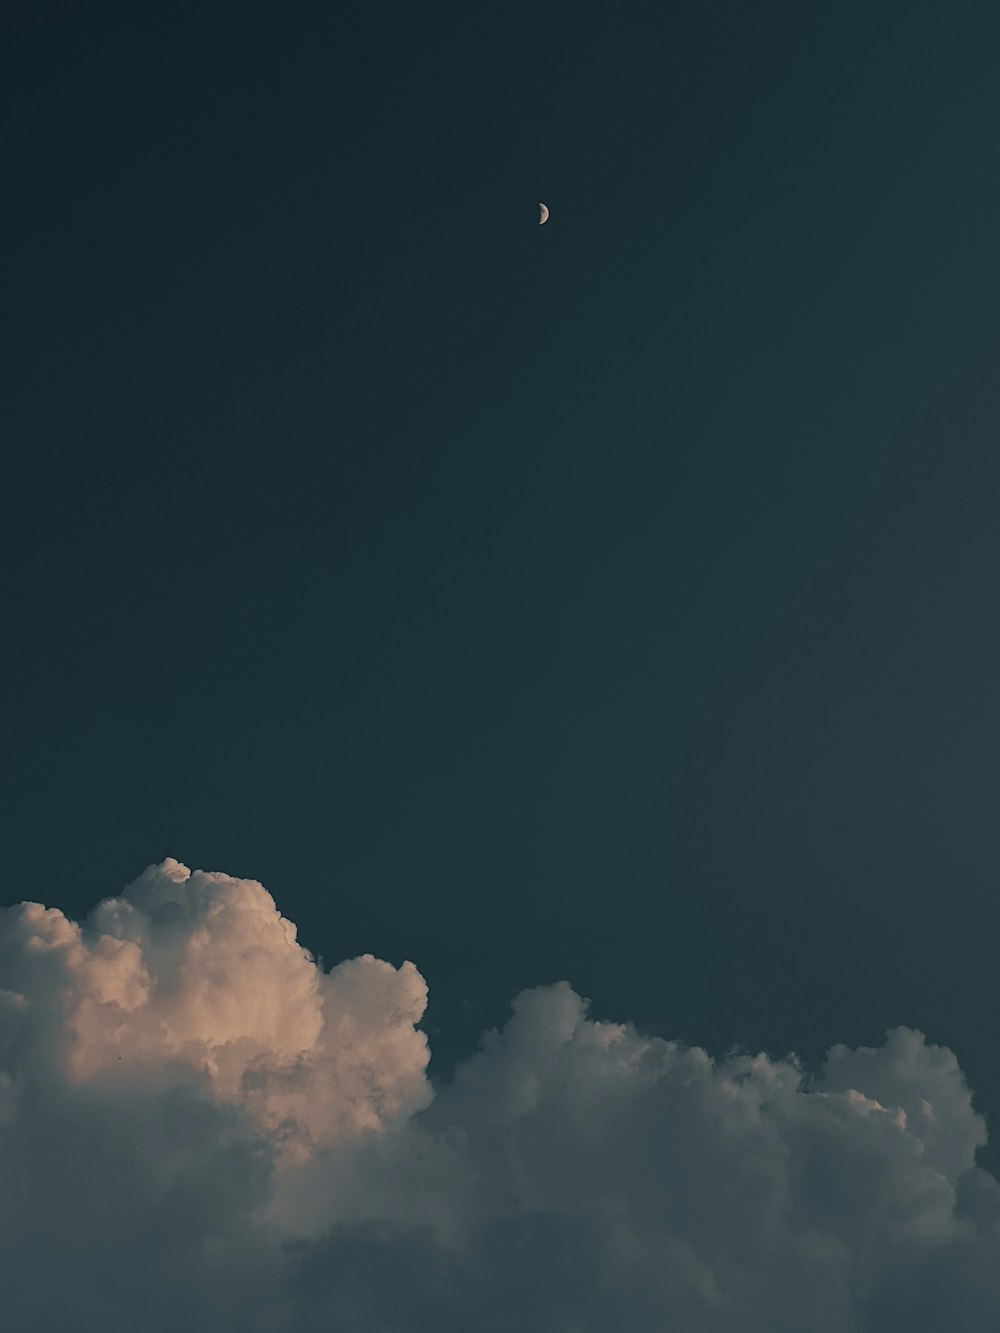 a plane flying through a cloudy sky with a moon in the distance